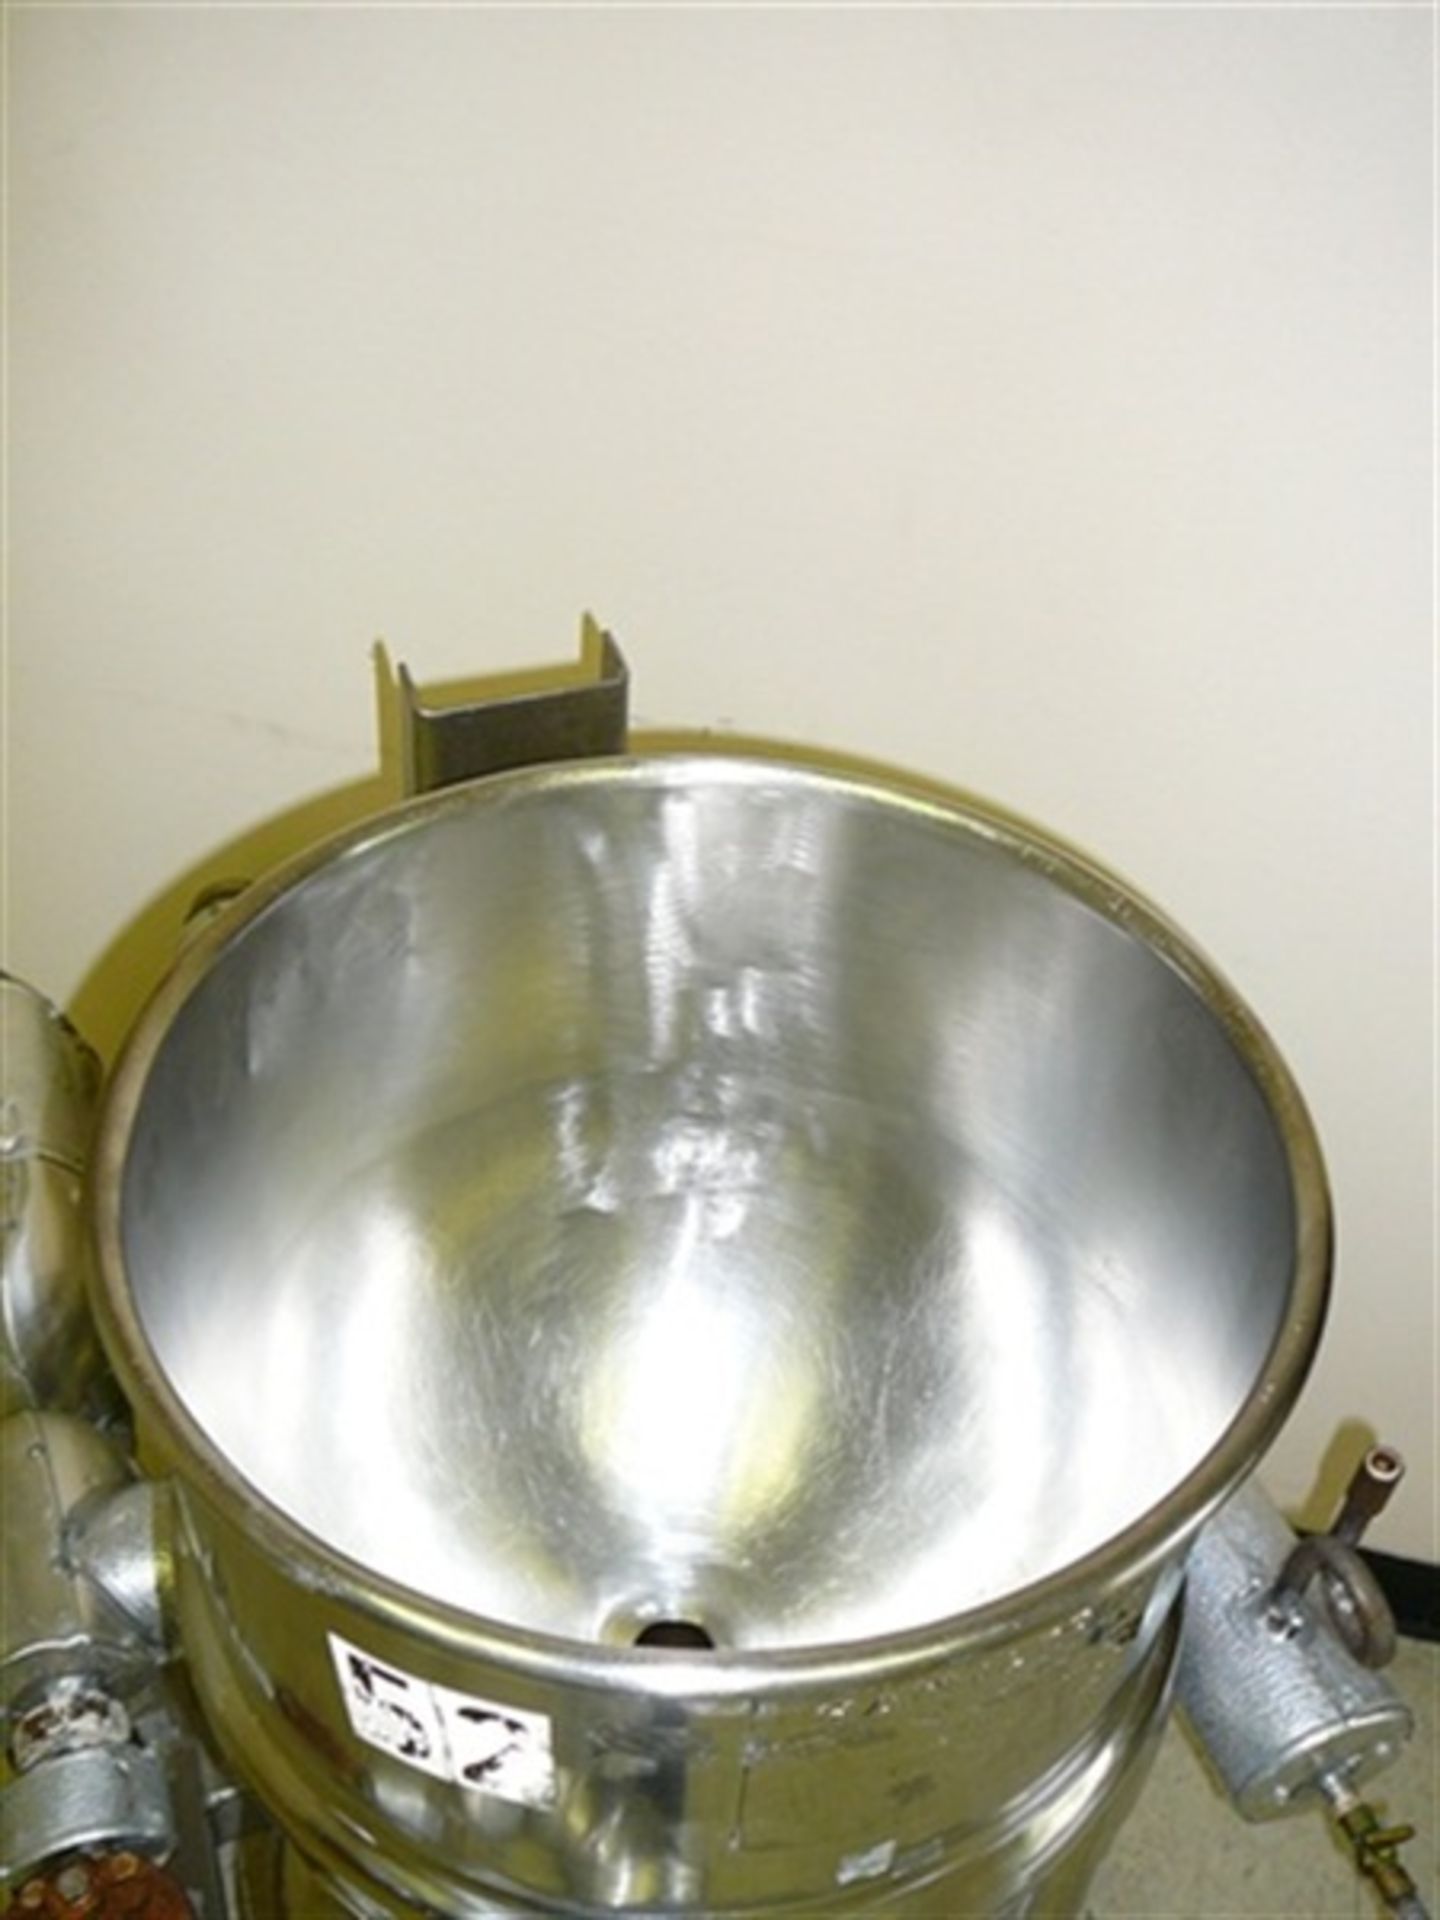 Hamilton 10 Gallon Stainless Steel Jacketed Kettle - Image 3 of 3